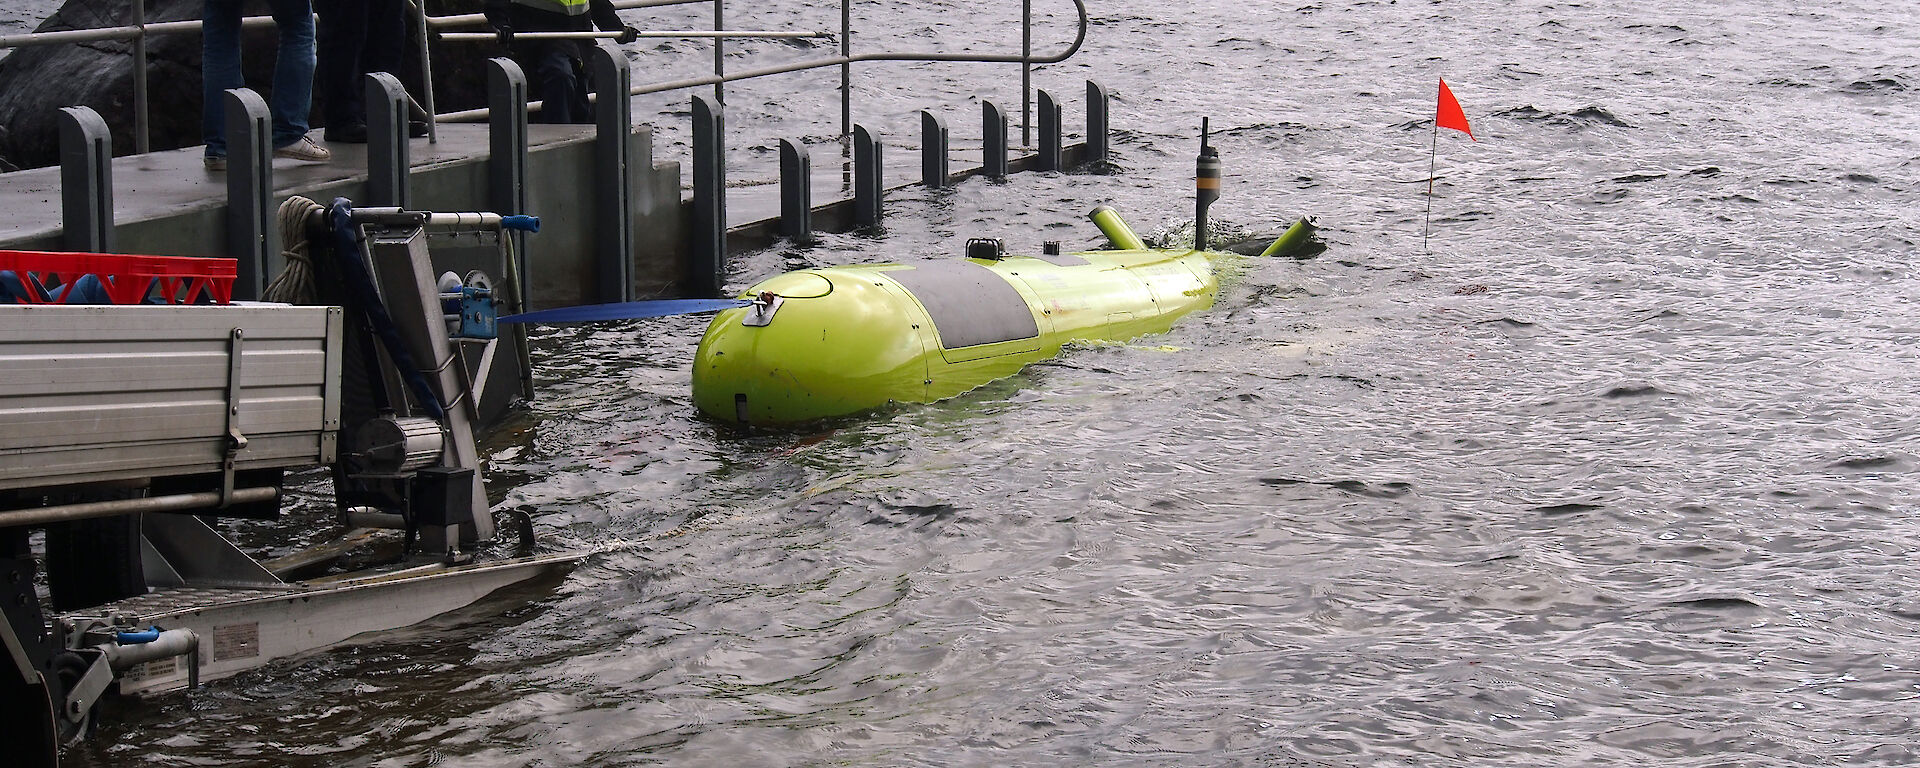 The yellow AUV with a support boat waiting offshore.